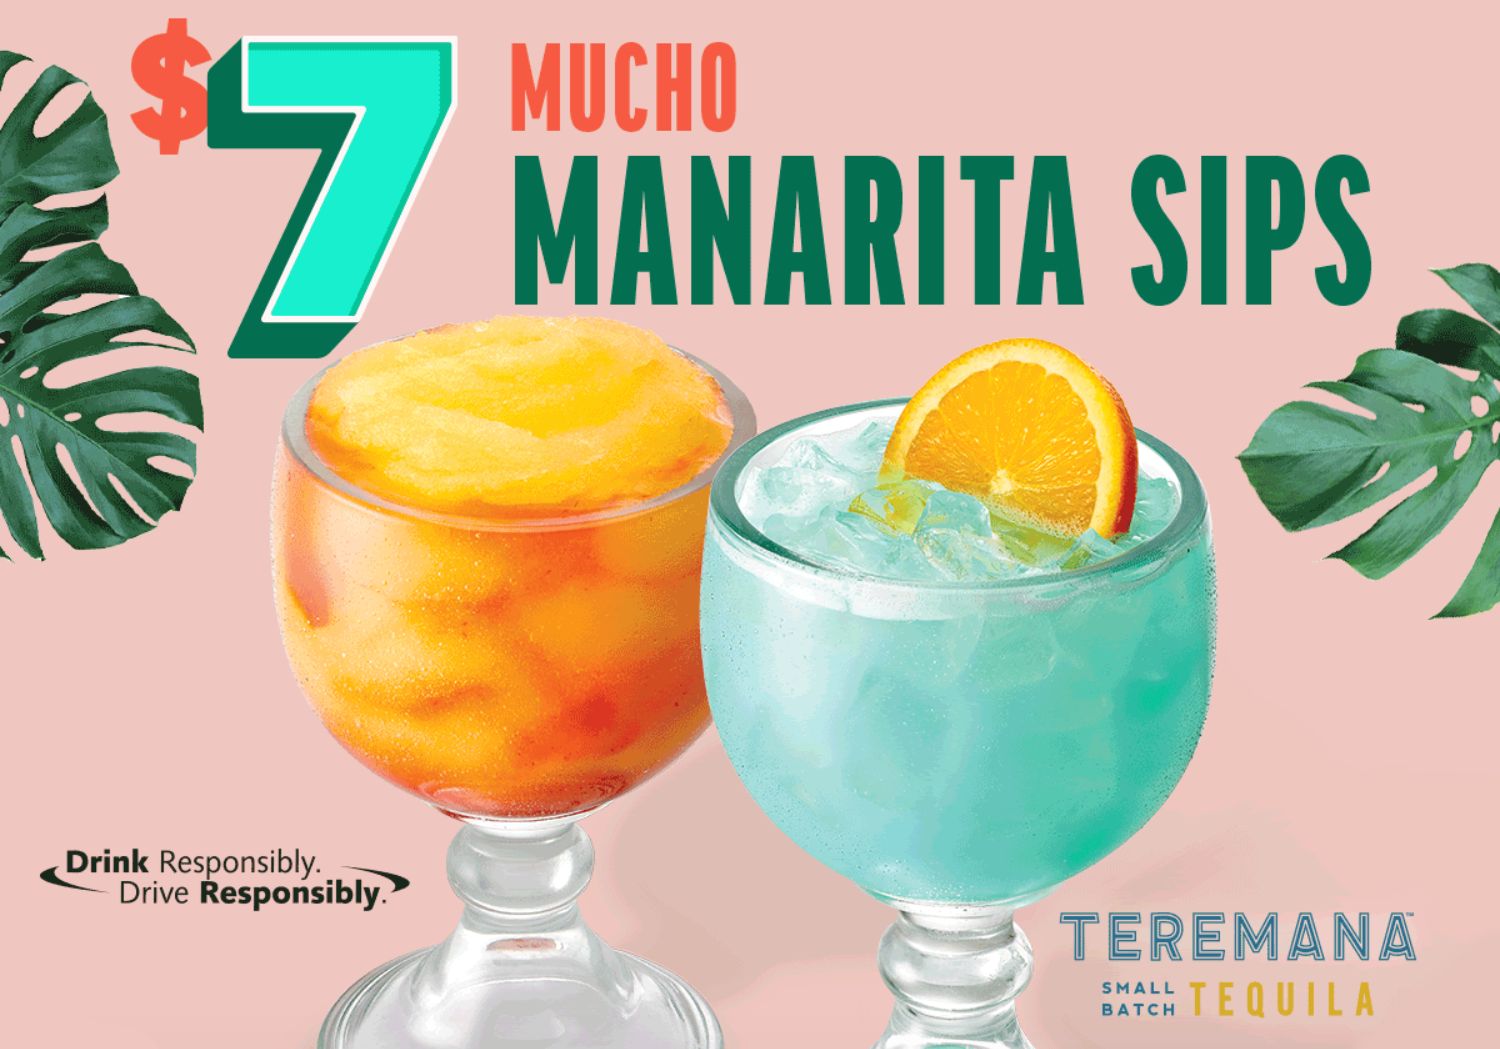 Applebee’s Features New $7 Mucho Manarita Sips for a Limited Time